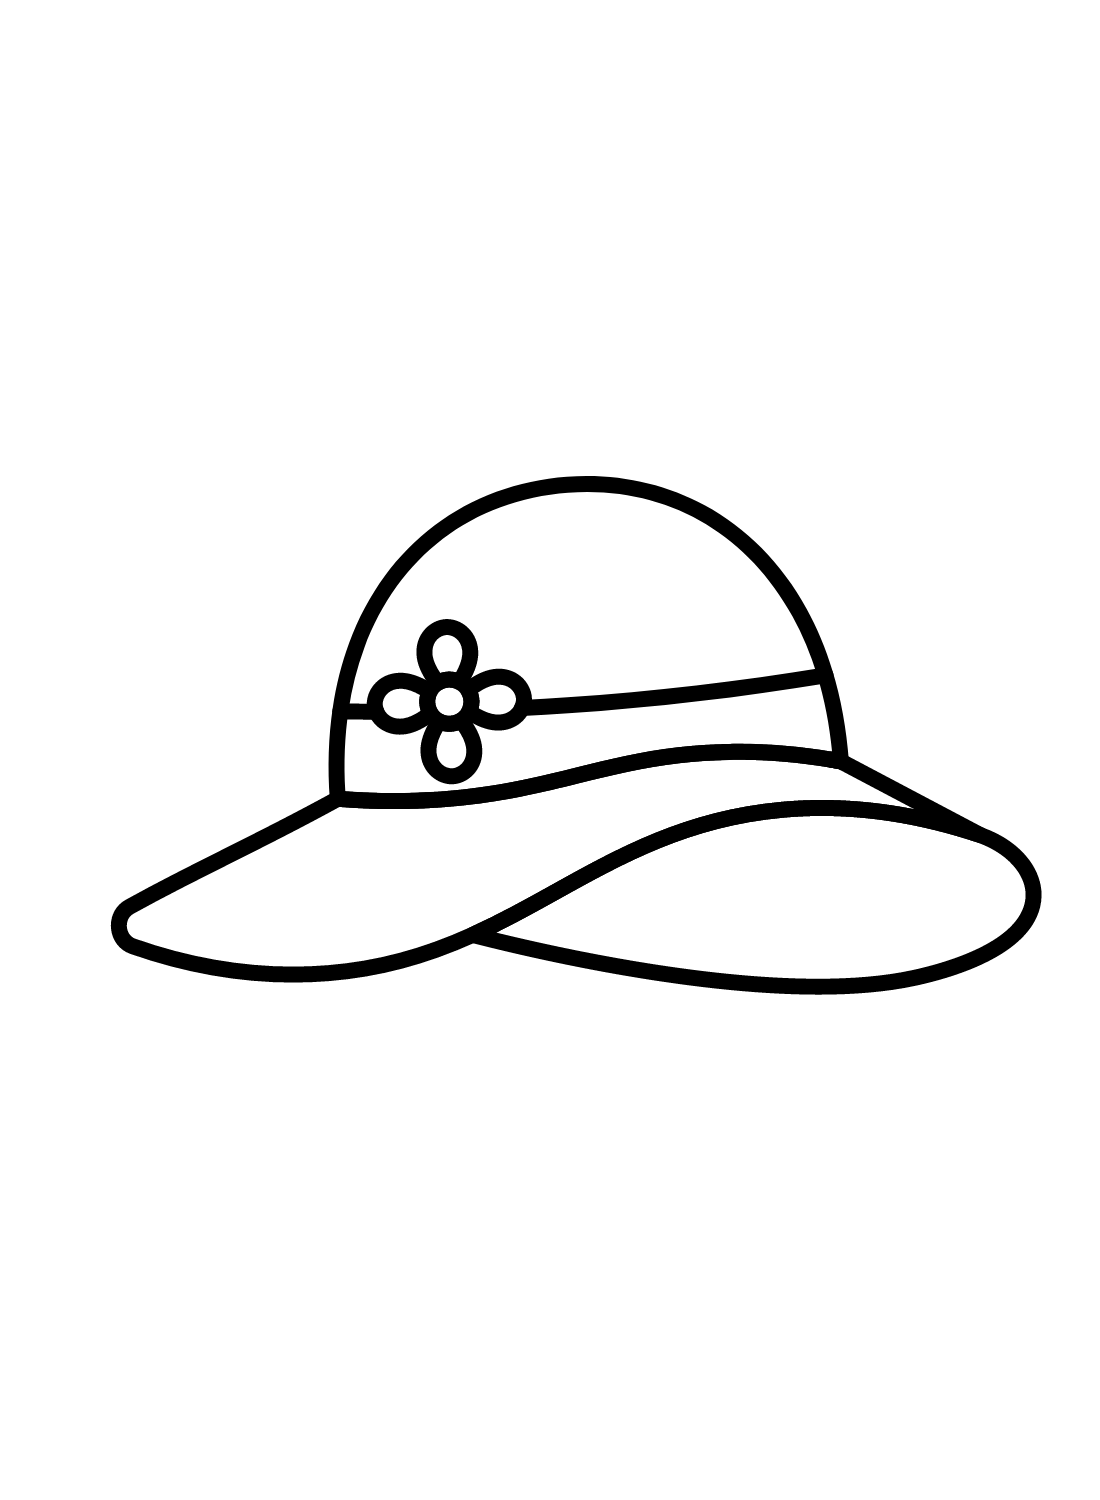 ladies hats coloring pages